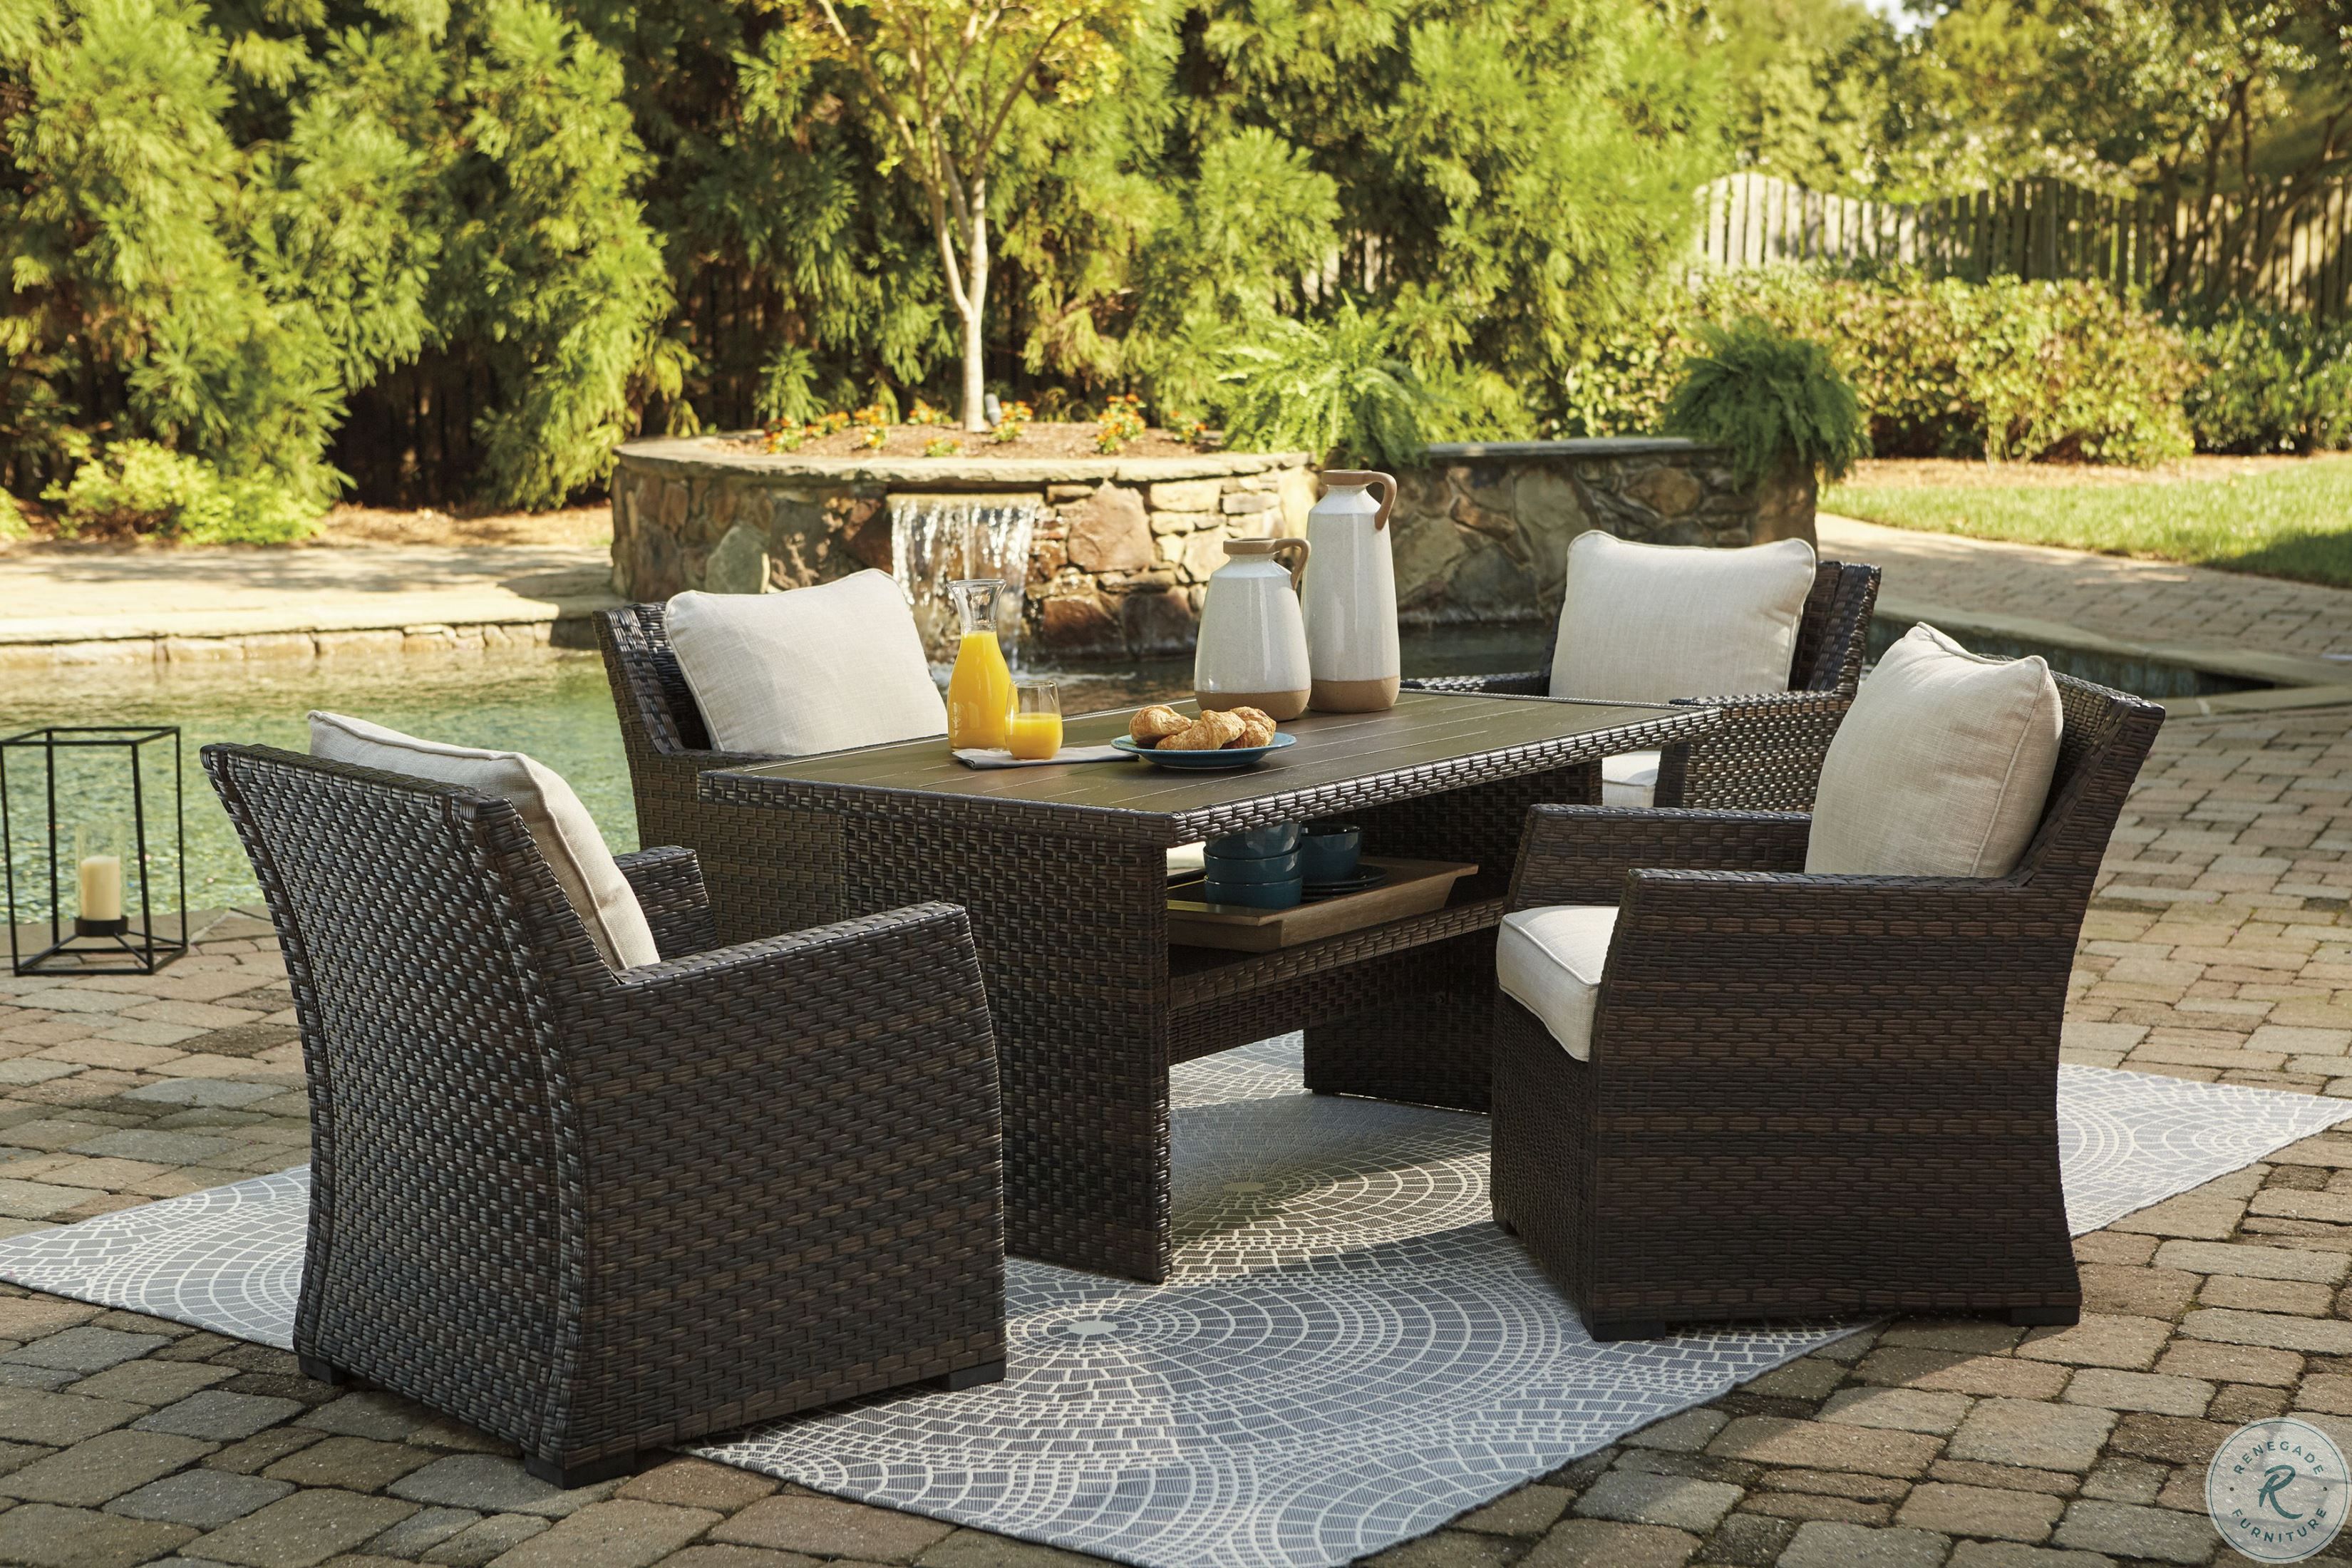 Easy Isle Dark Brown And Beige Outdoor Rectangular Dining Table